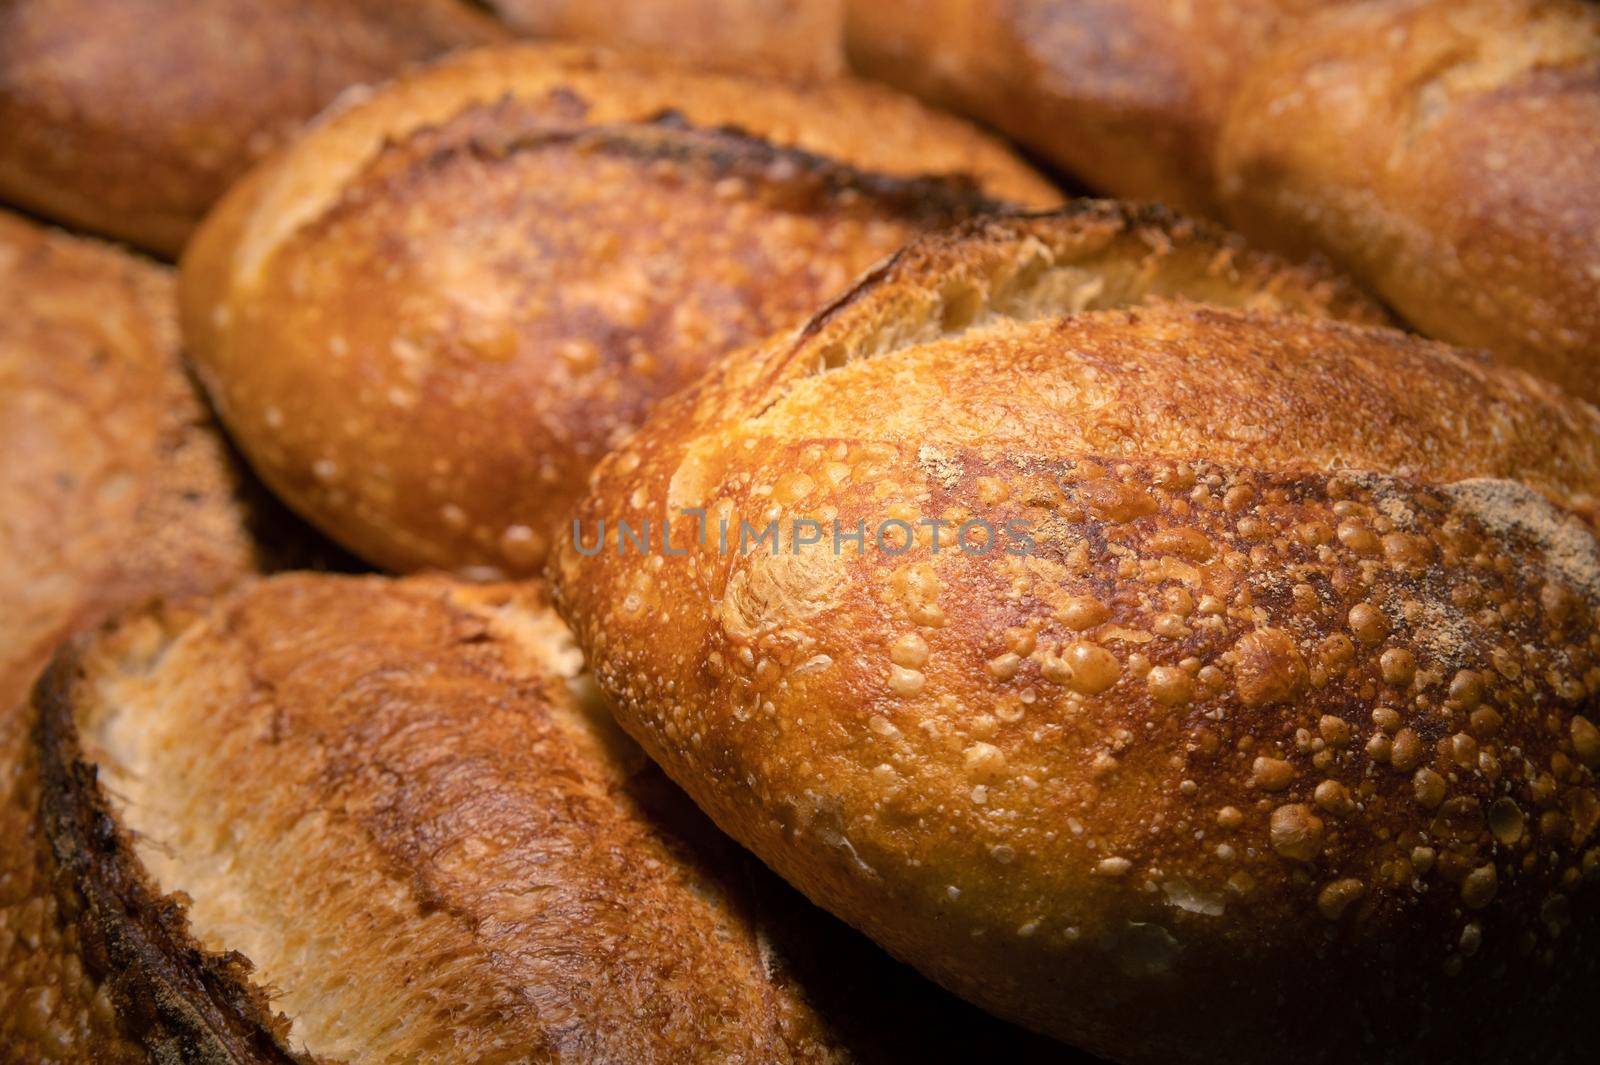 Appetizing fresh hot artisan bread. Close-up of a loaf of delicious bread on a wooden pallet.